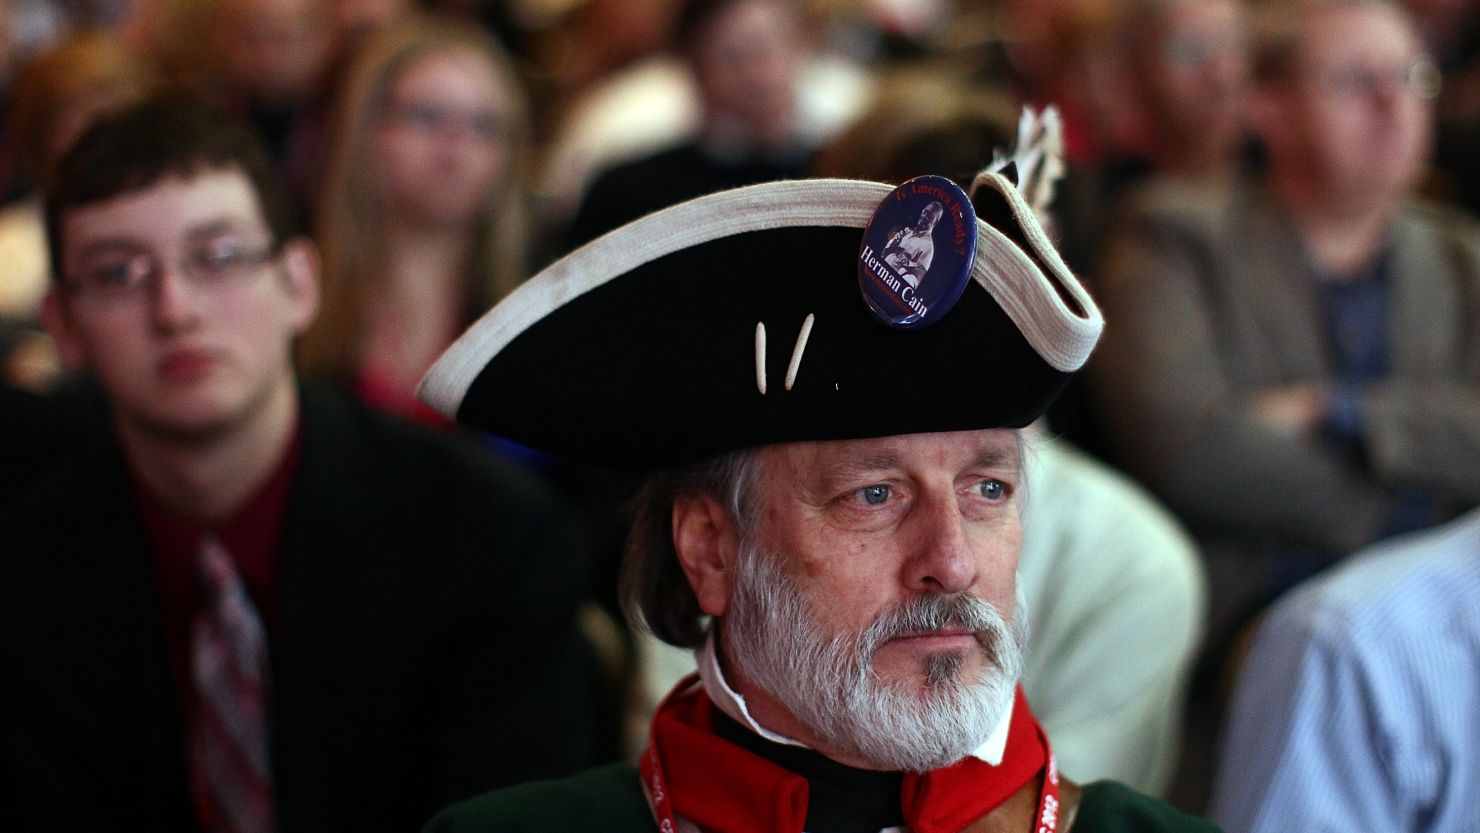  Tea party activist William Temple attends the Conservative Political Action Conference on Thursday in Washington.